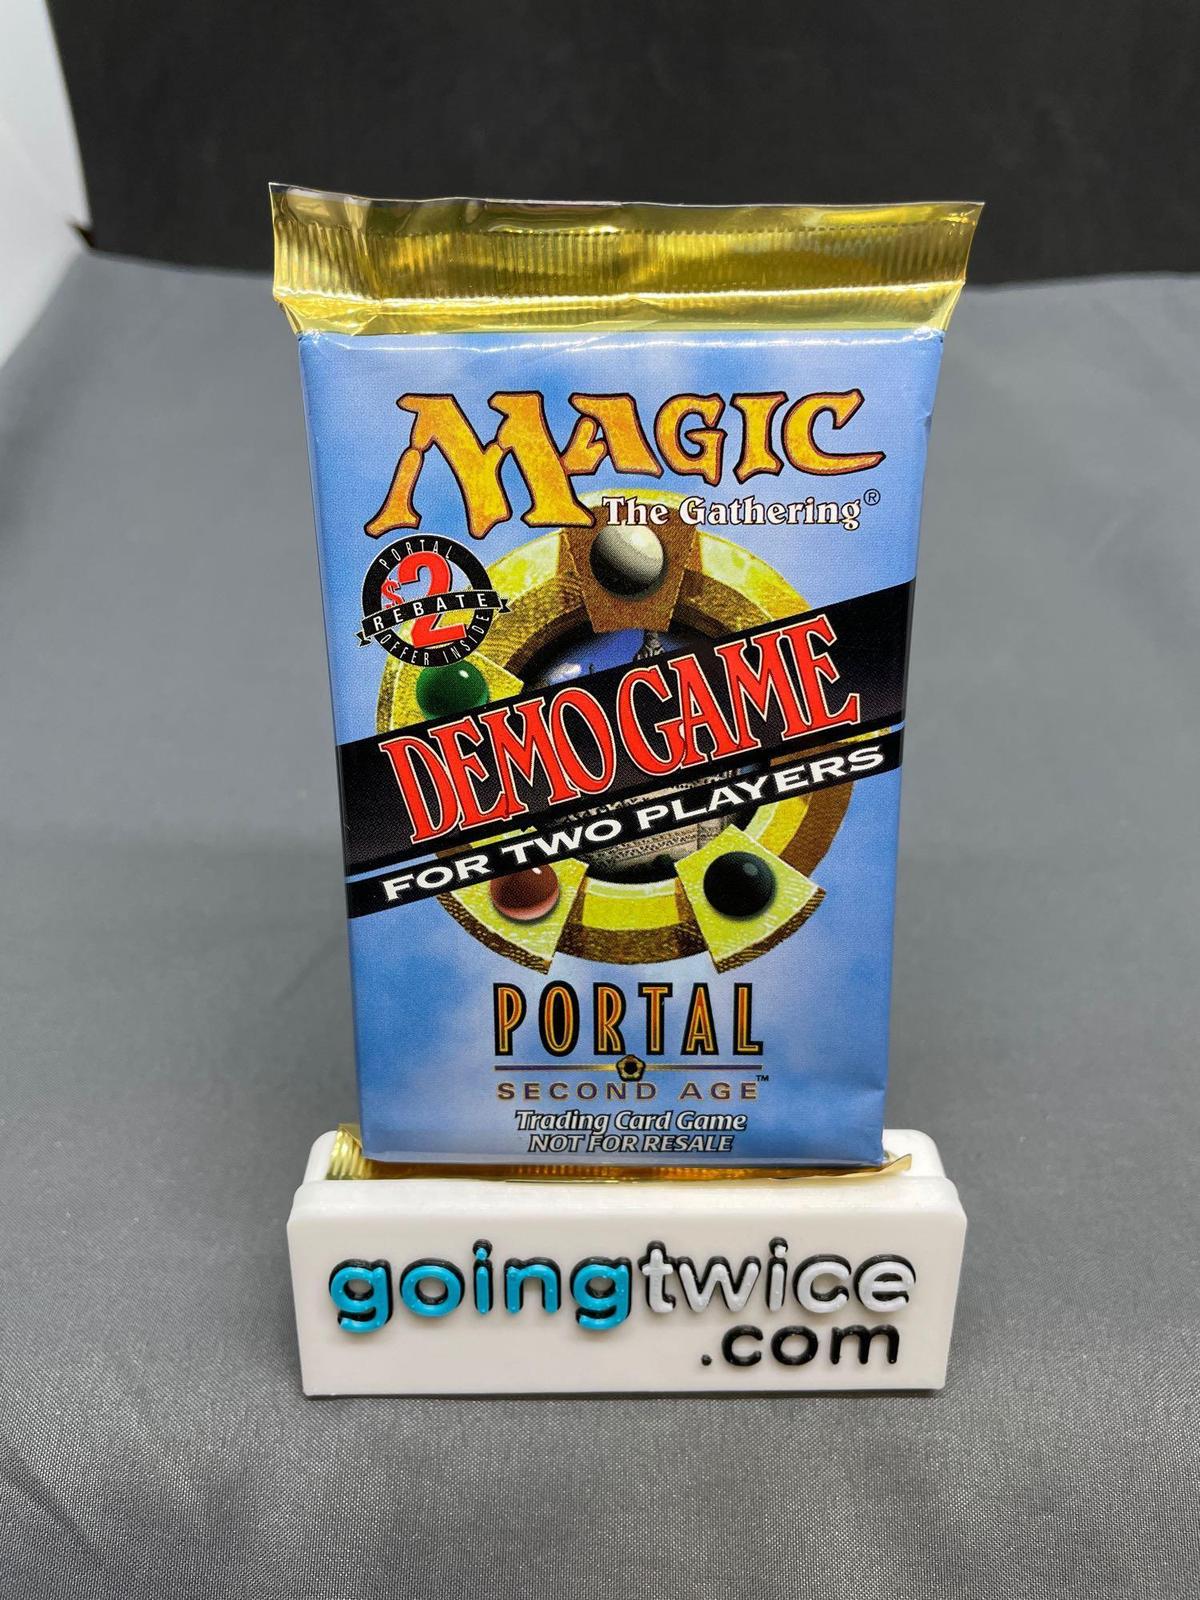 Factory Sealed Vintage Magic the Gathering PORTAL Second Age Demo Game Two Player Pack - Very Rare!